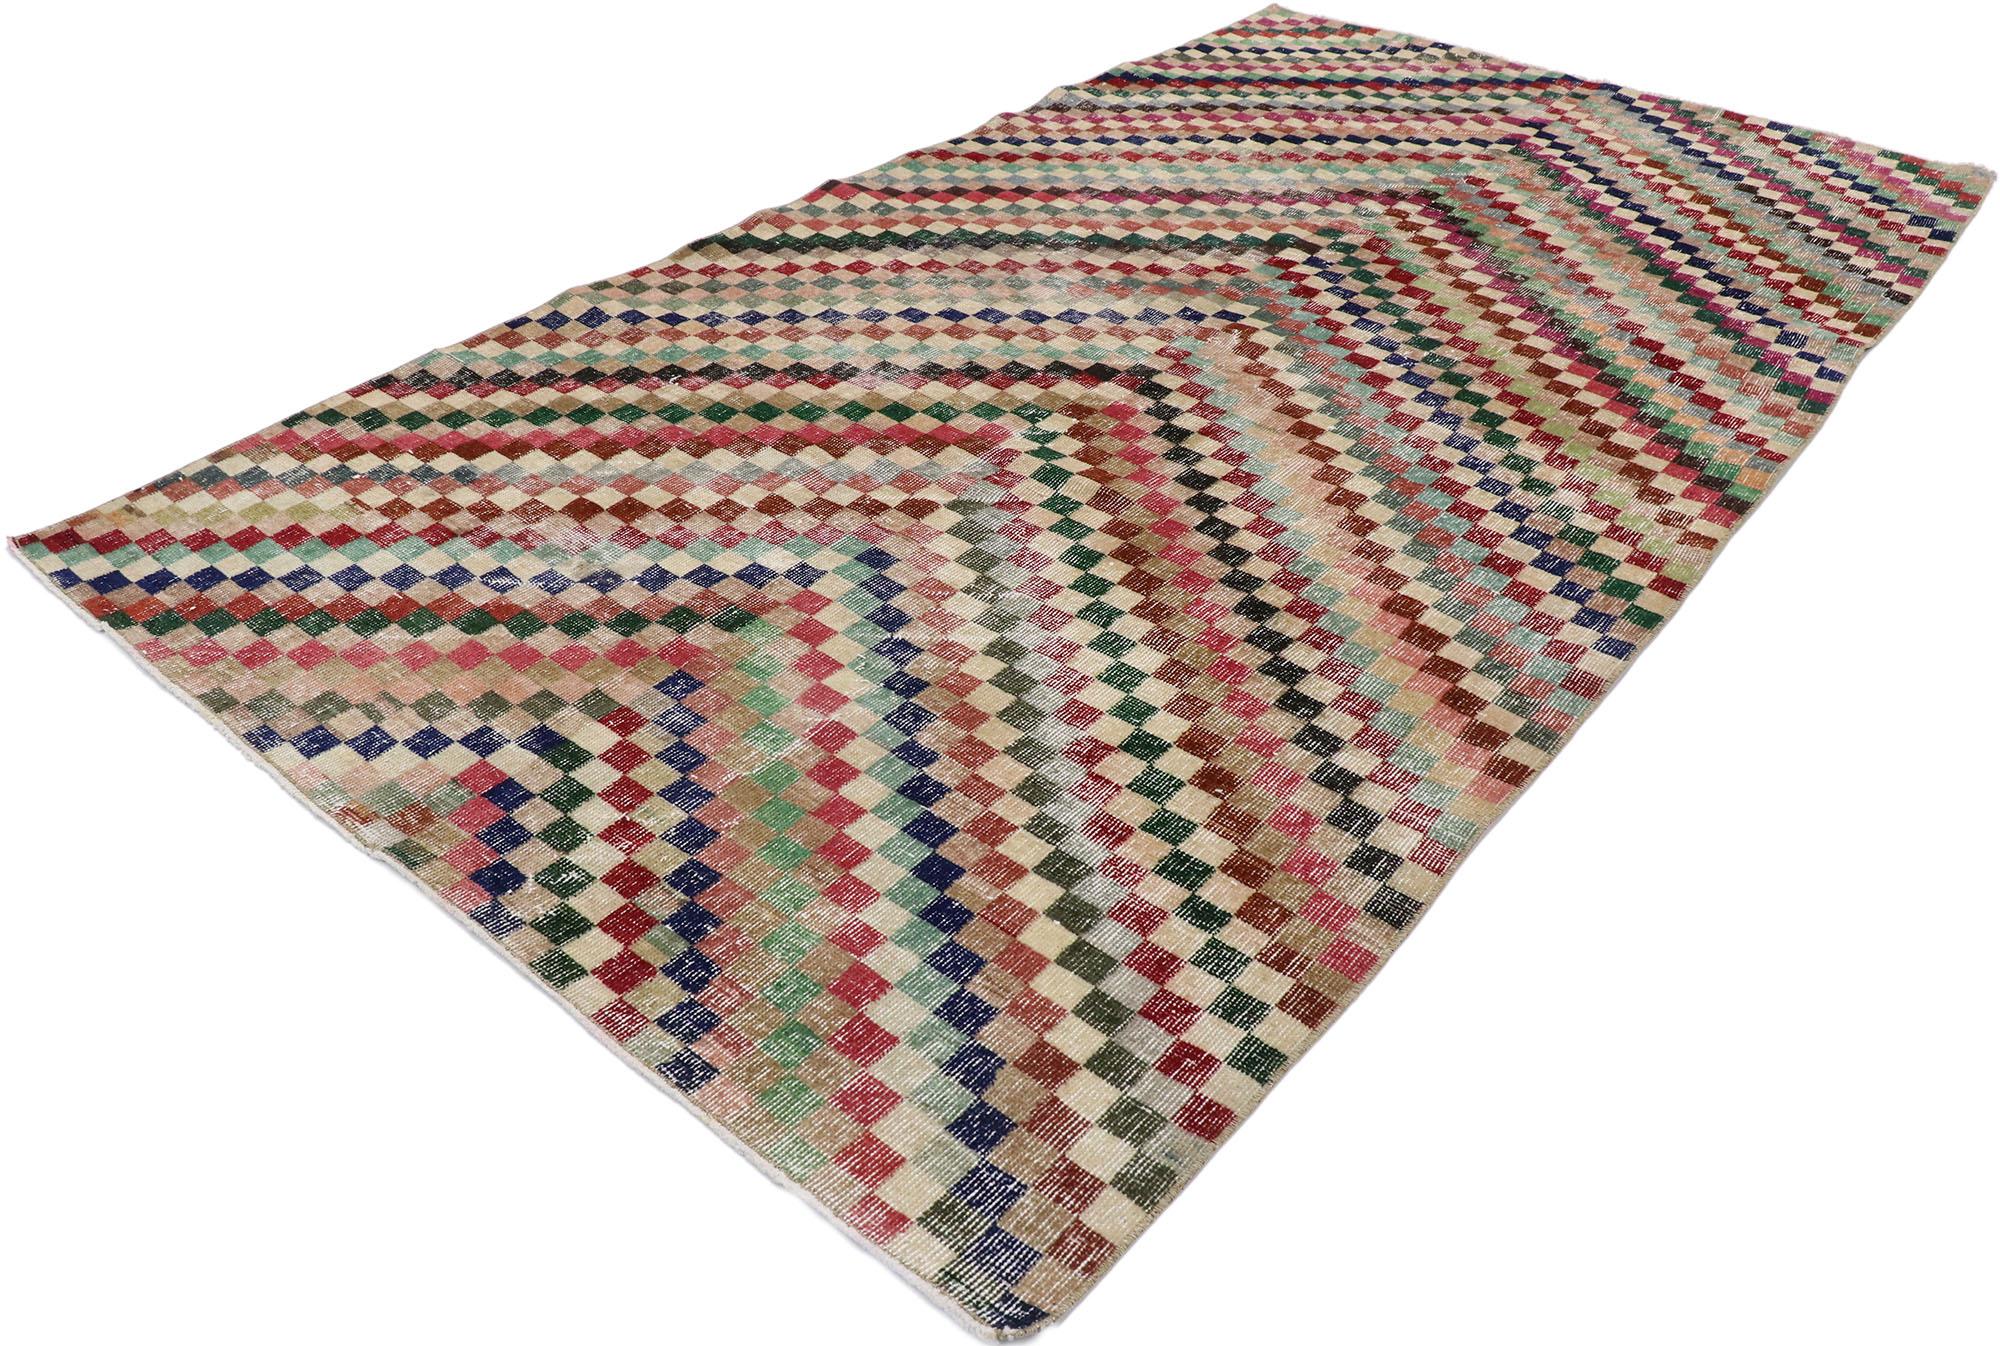 53361 distressed vintage Turkish Sivas rug with Mid-Century Modern Rustic style. This hand knotted wool distressed vintage Turkish Sivas rug features an all-over checkered chevron pattern comprised of rows of multicolored squares. Each row of cubes